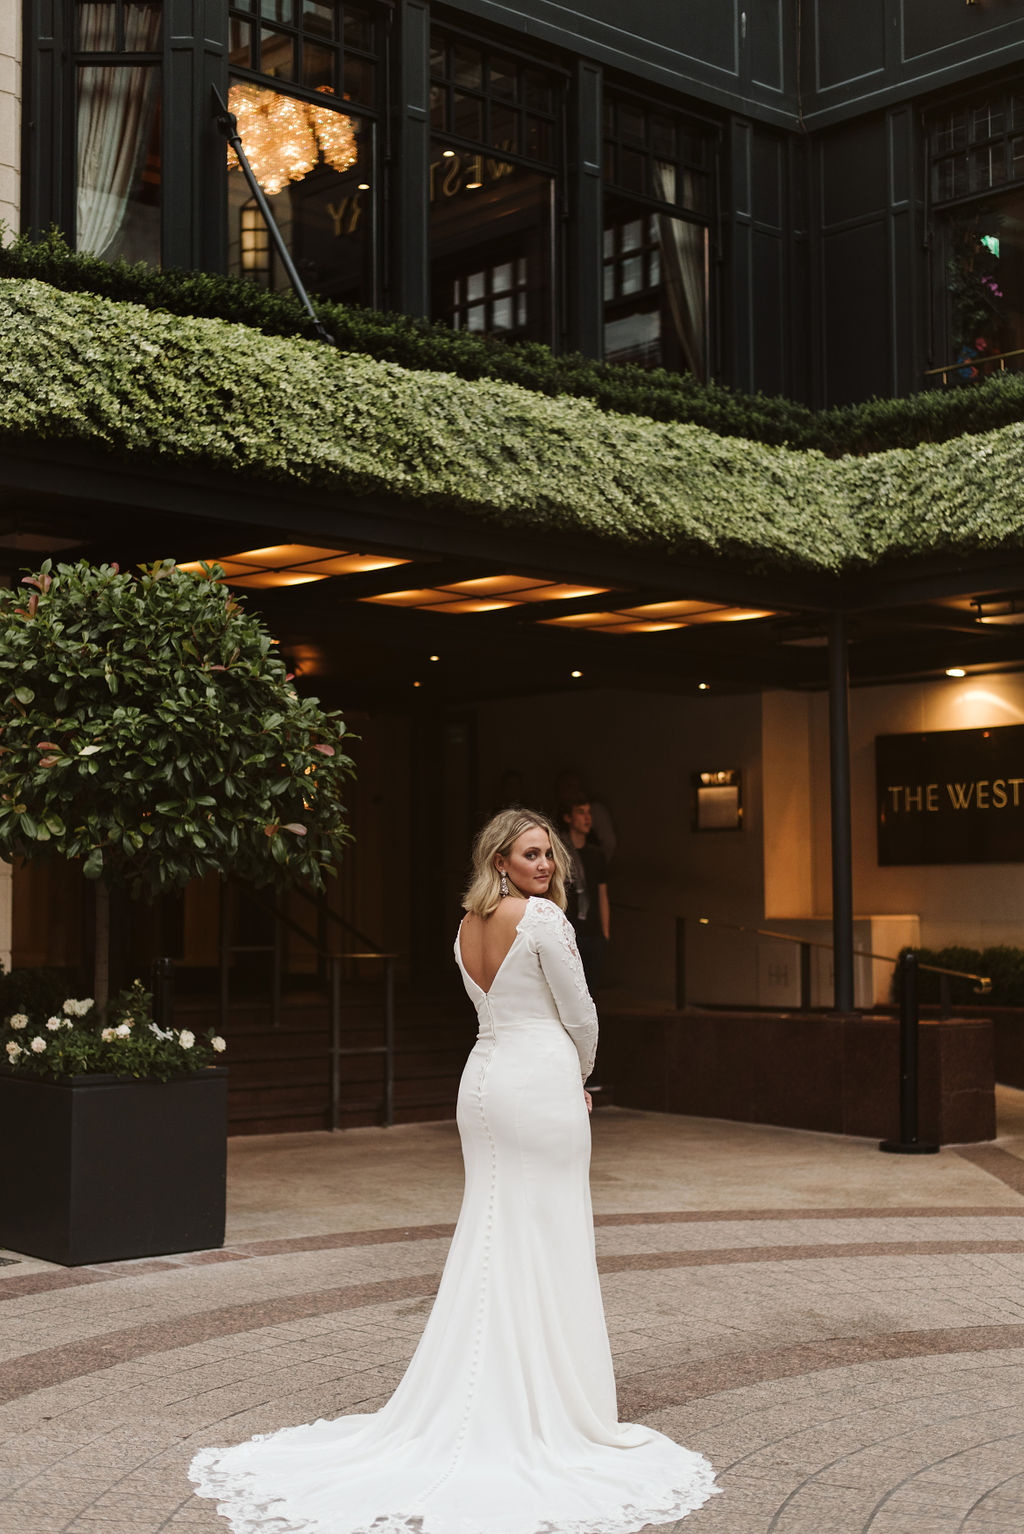 Bride in front of hotel in Dublin, Ireland wears a long sleeve simple wedding dress with lace detail